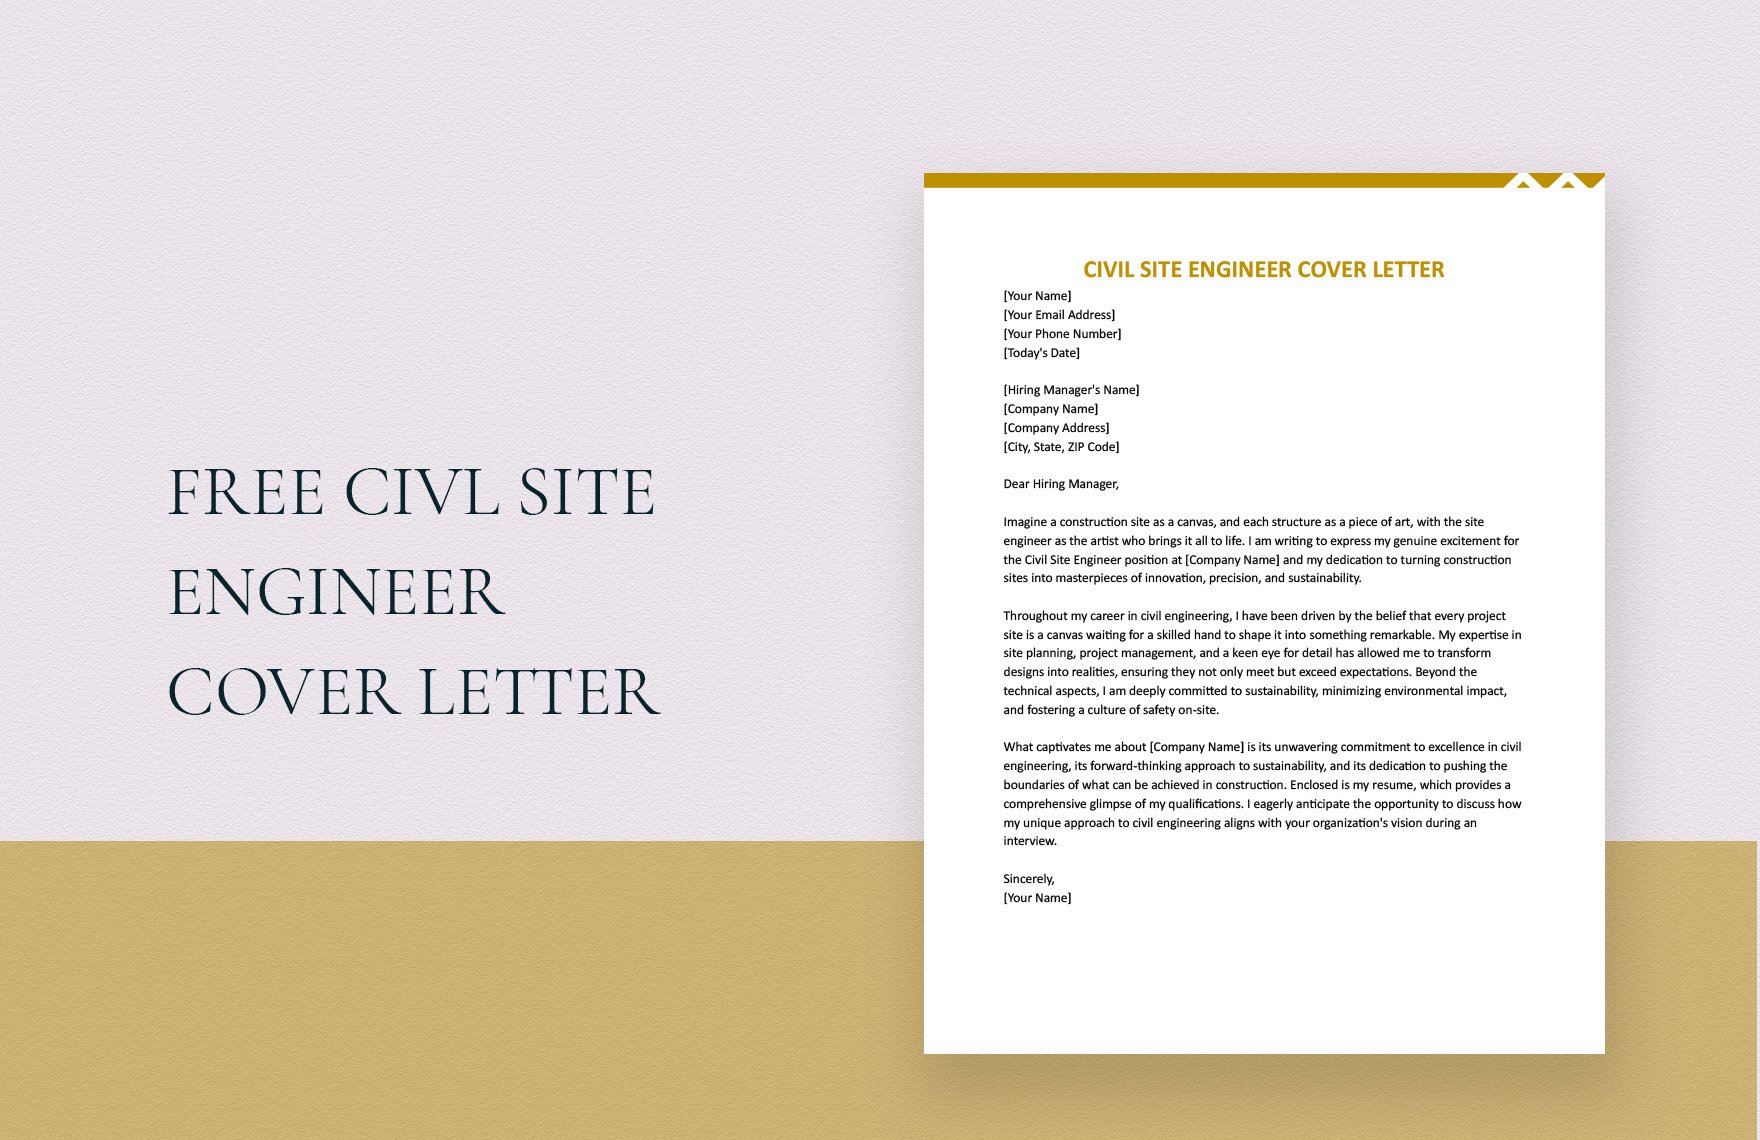 Civil Site Engineer Cover Letter